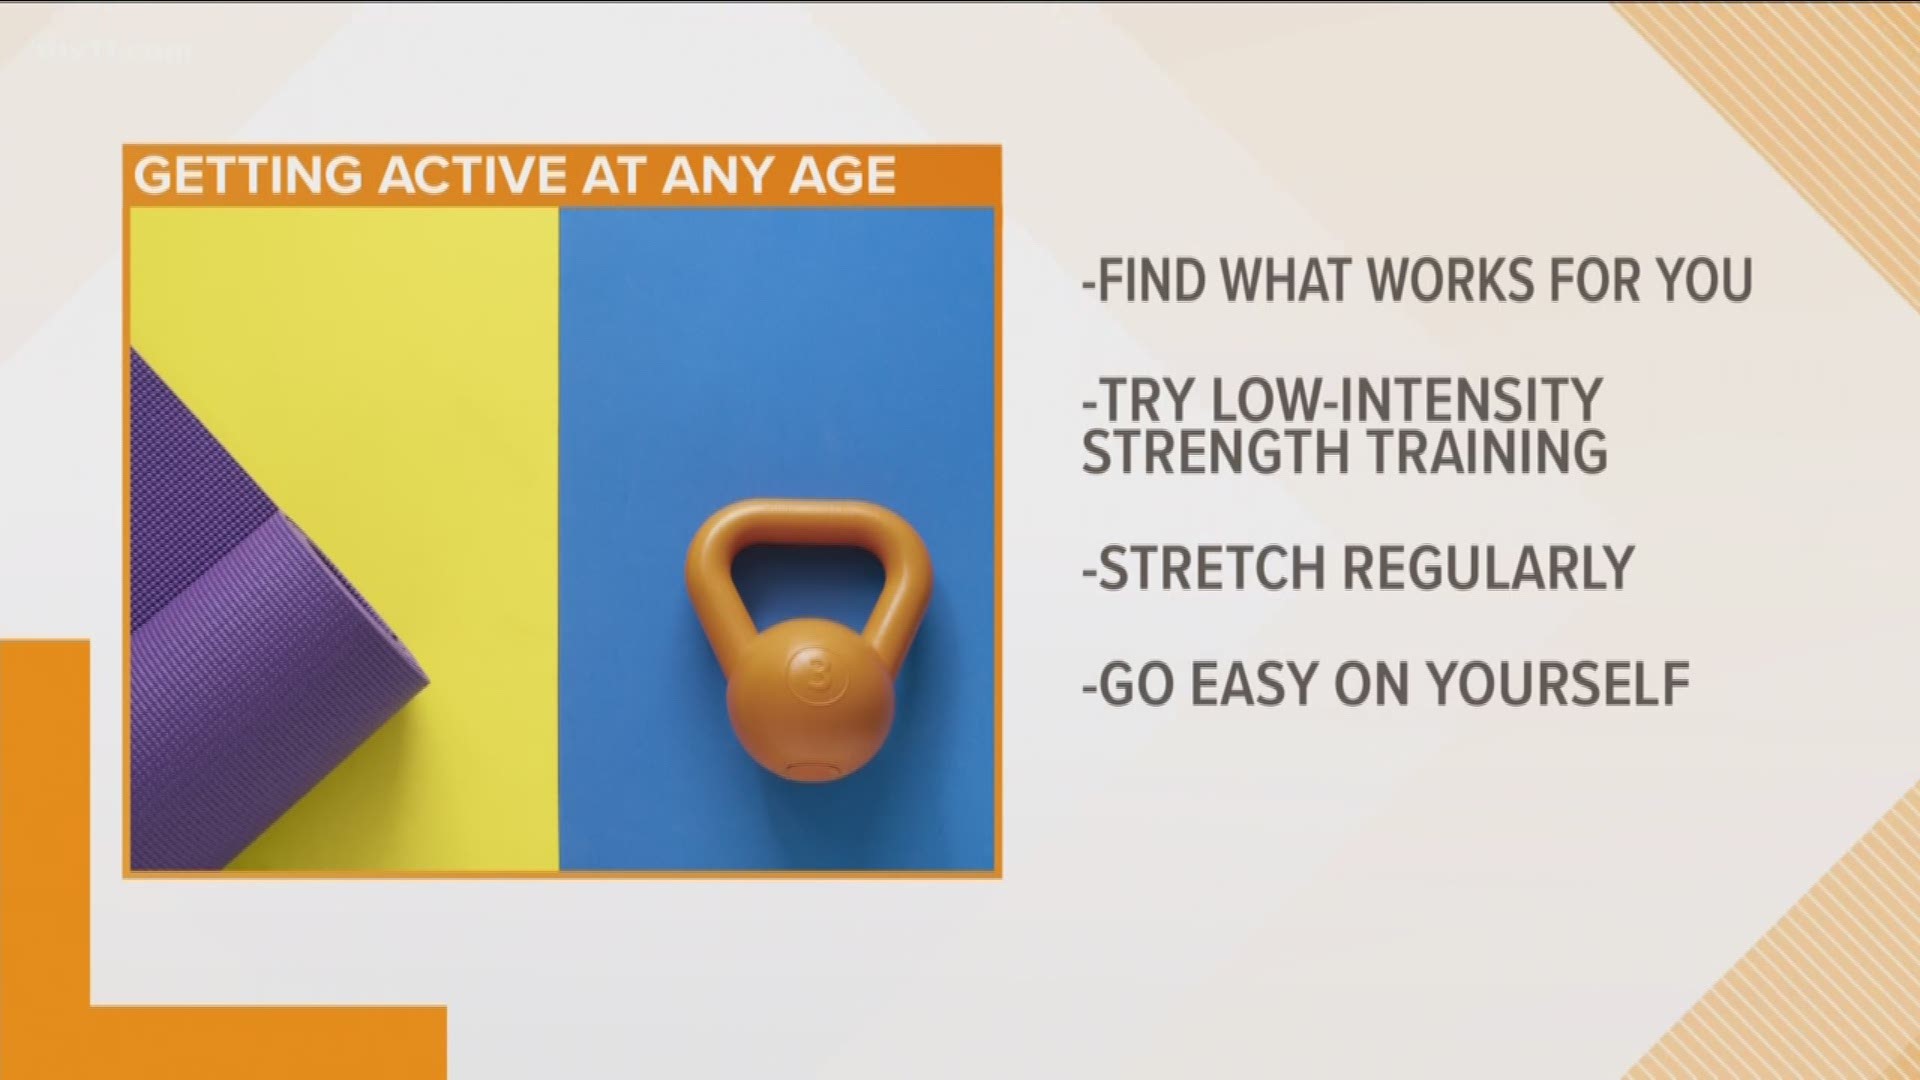 Only 39 percent of Arkansans between 45 and 54 get at least 150 minutes of moderate exercise a week. We are joined by QualChoice Health Insurance's Aaron Sadler to explain why that needs to change.